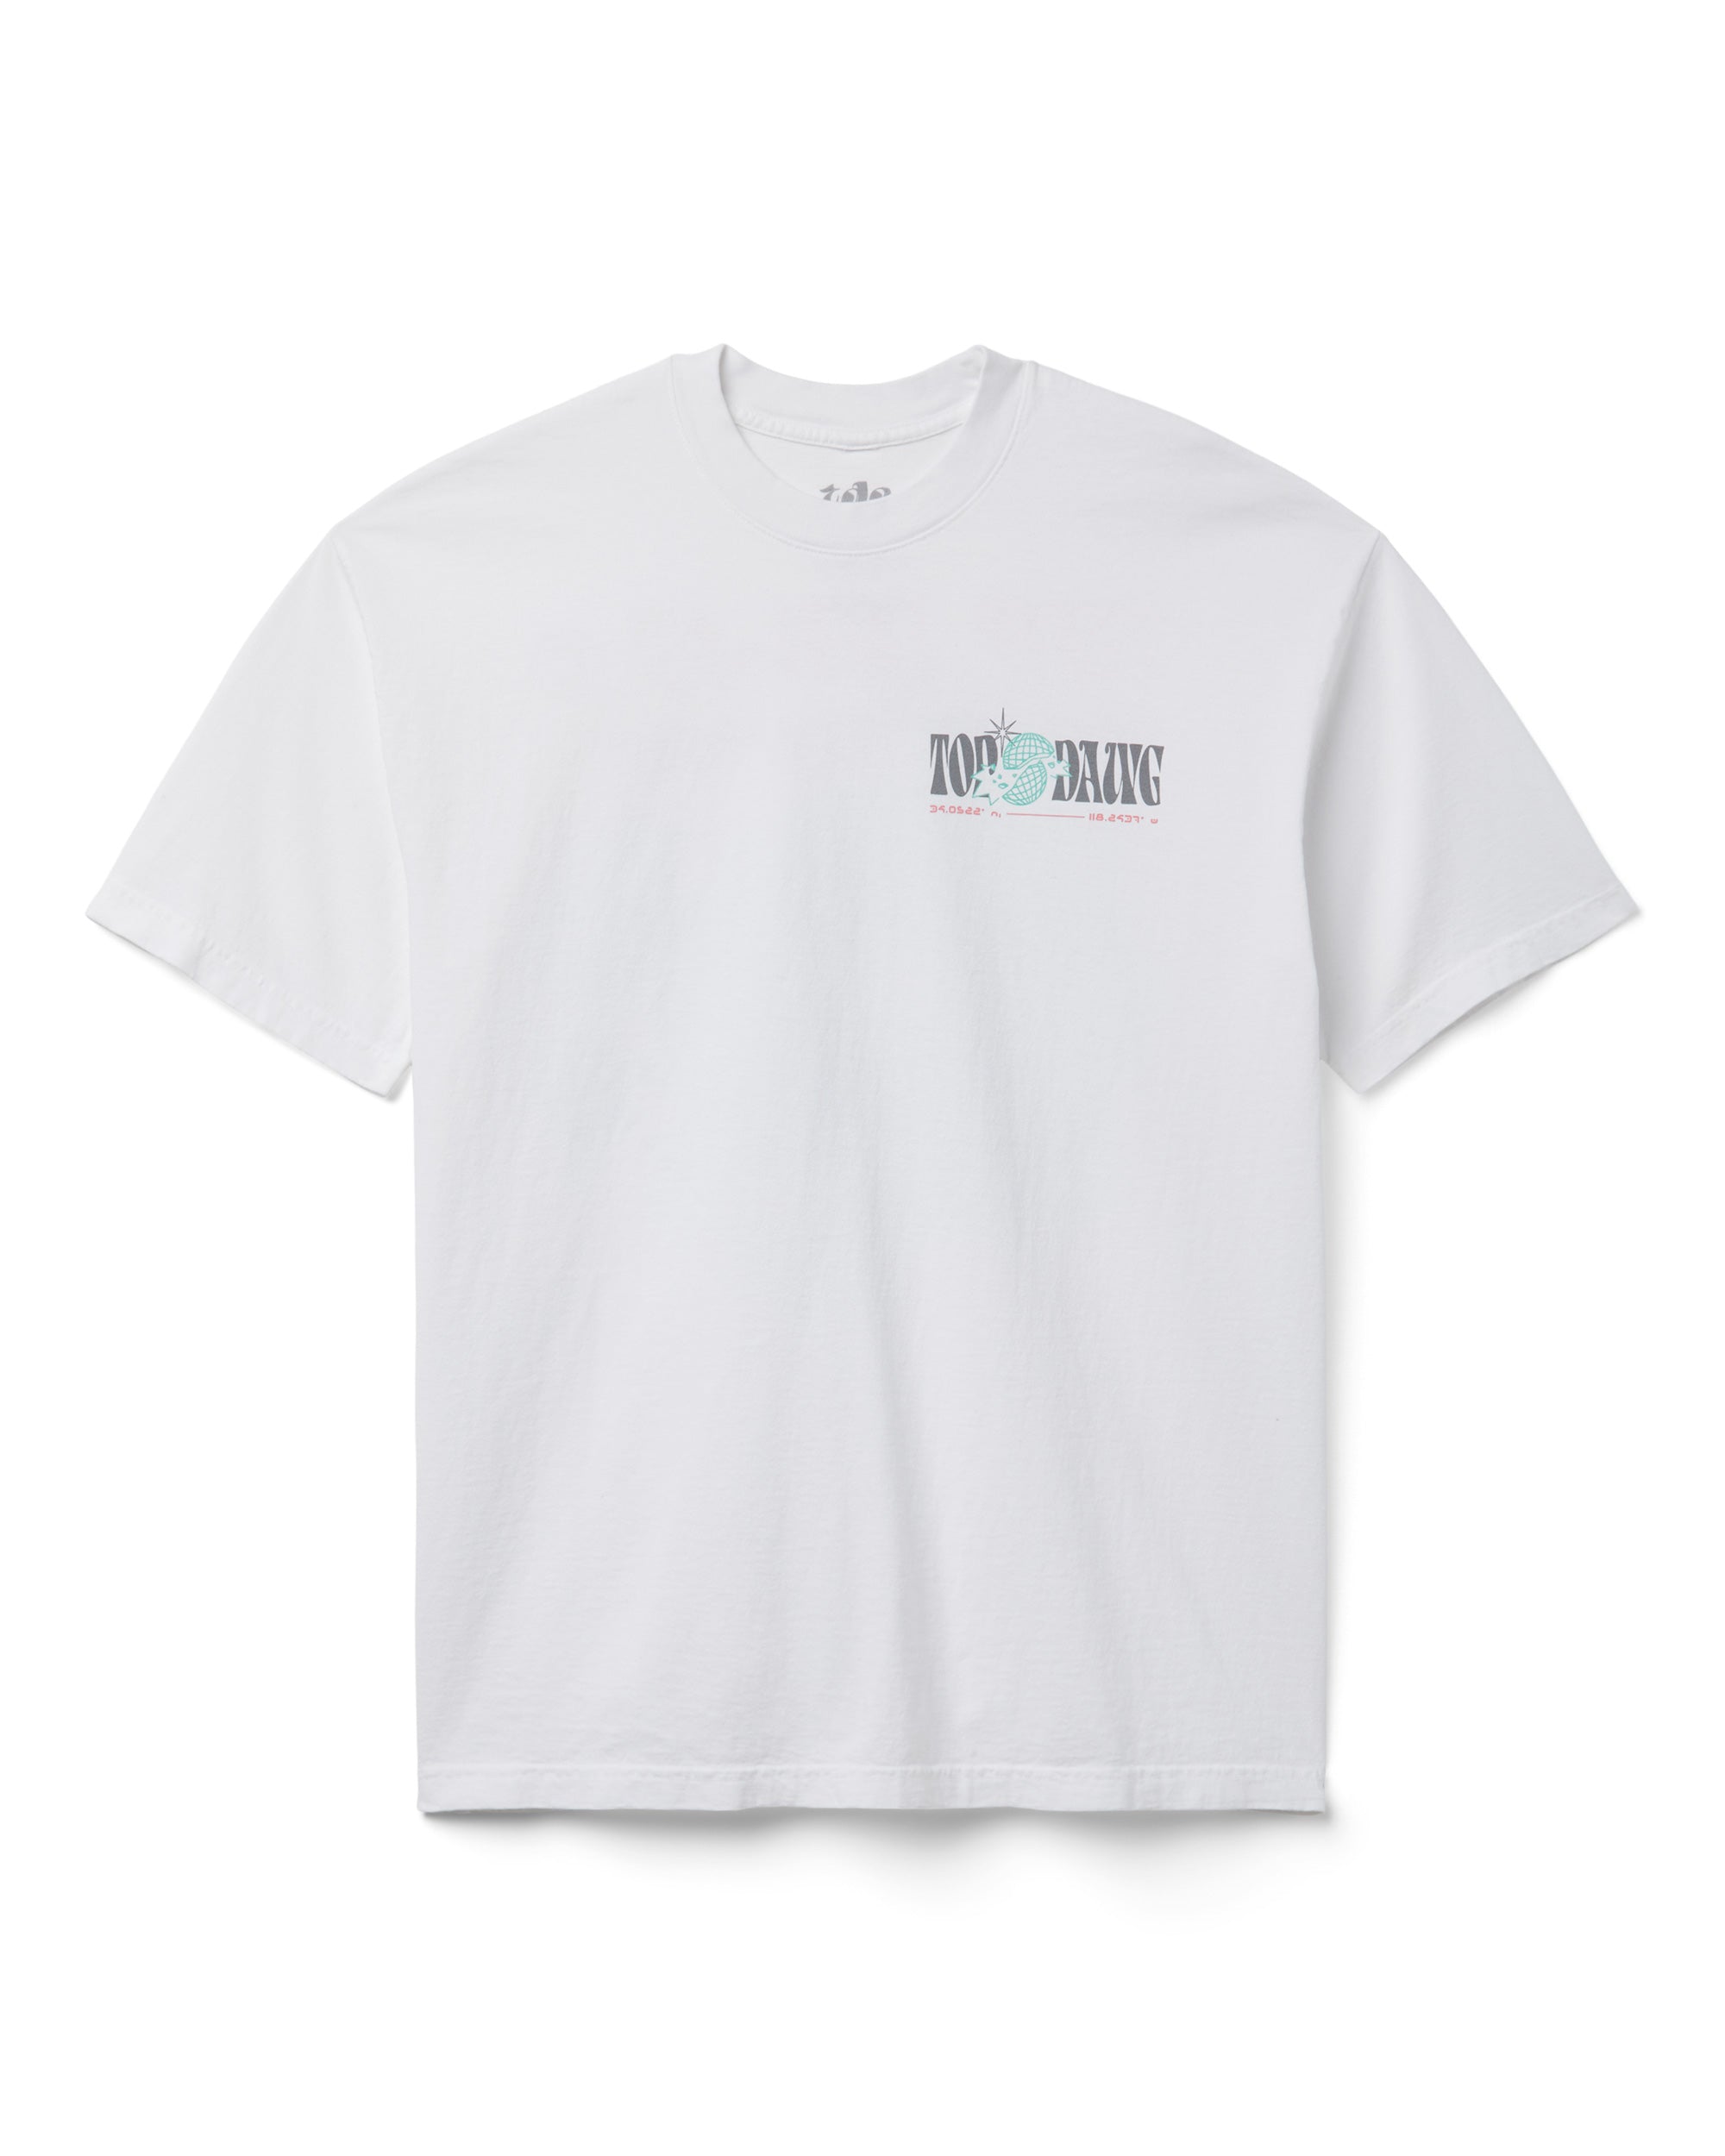 Global T-Shirt (White) – Top Dawg Ent